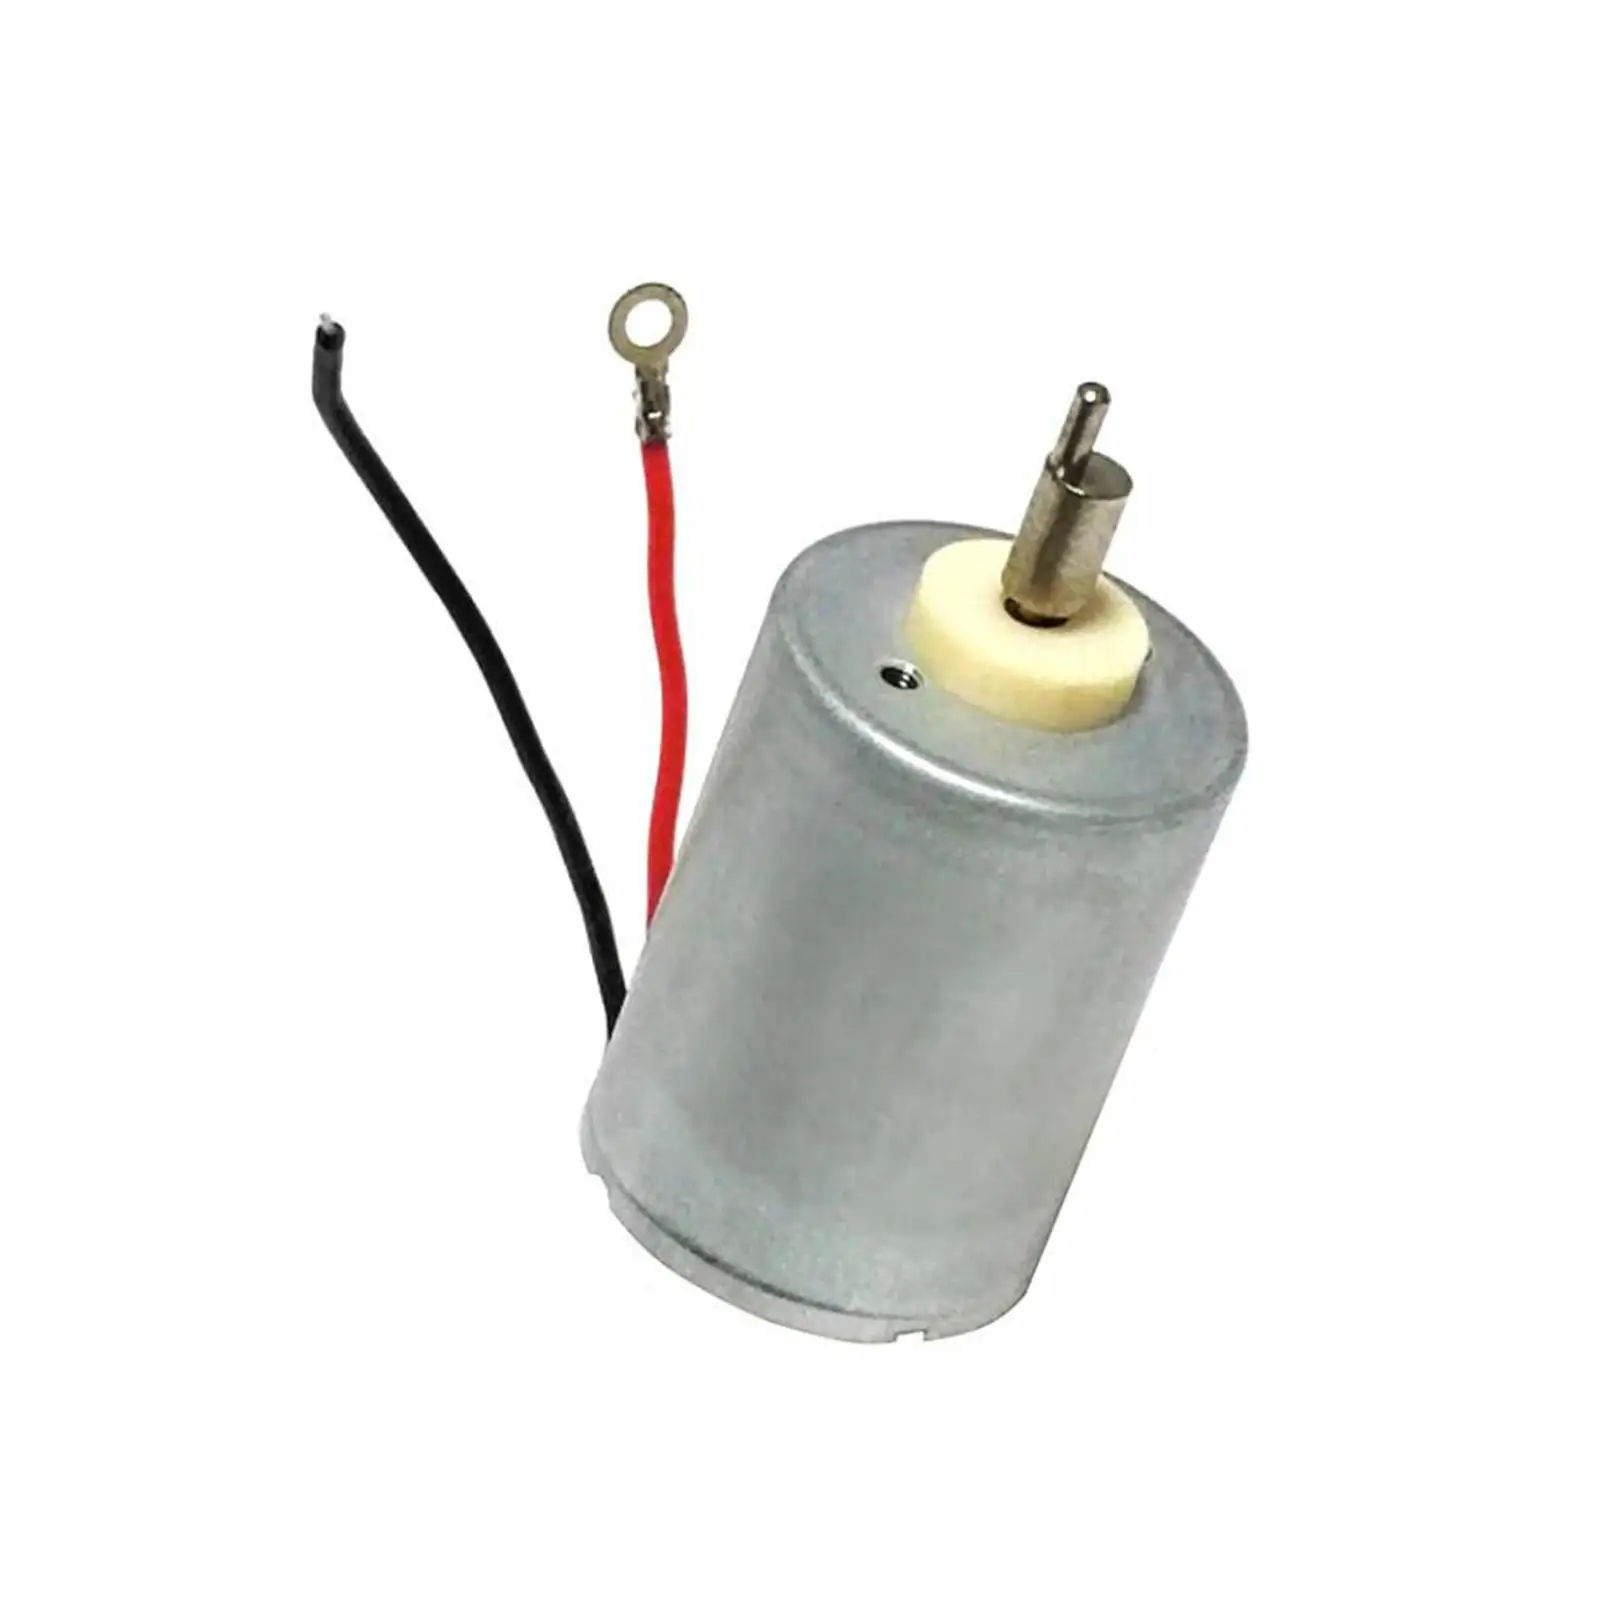 Motor for Hair Clippers Parts 7000 PRM Professional Replacement Brushless Motor Hair Trimmer Motor for 2240 2241 8504 8591 8148